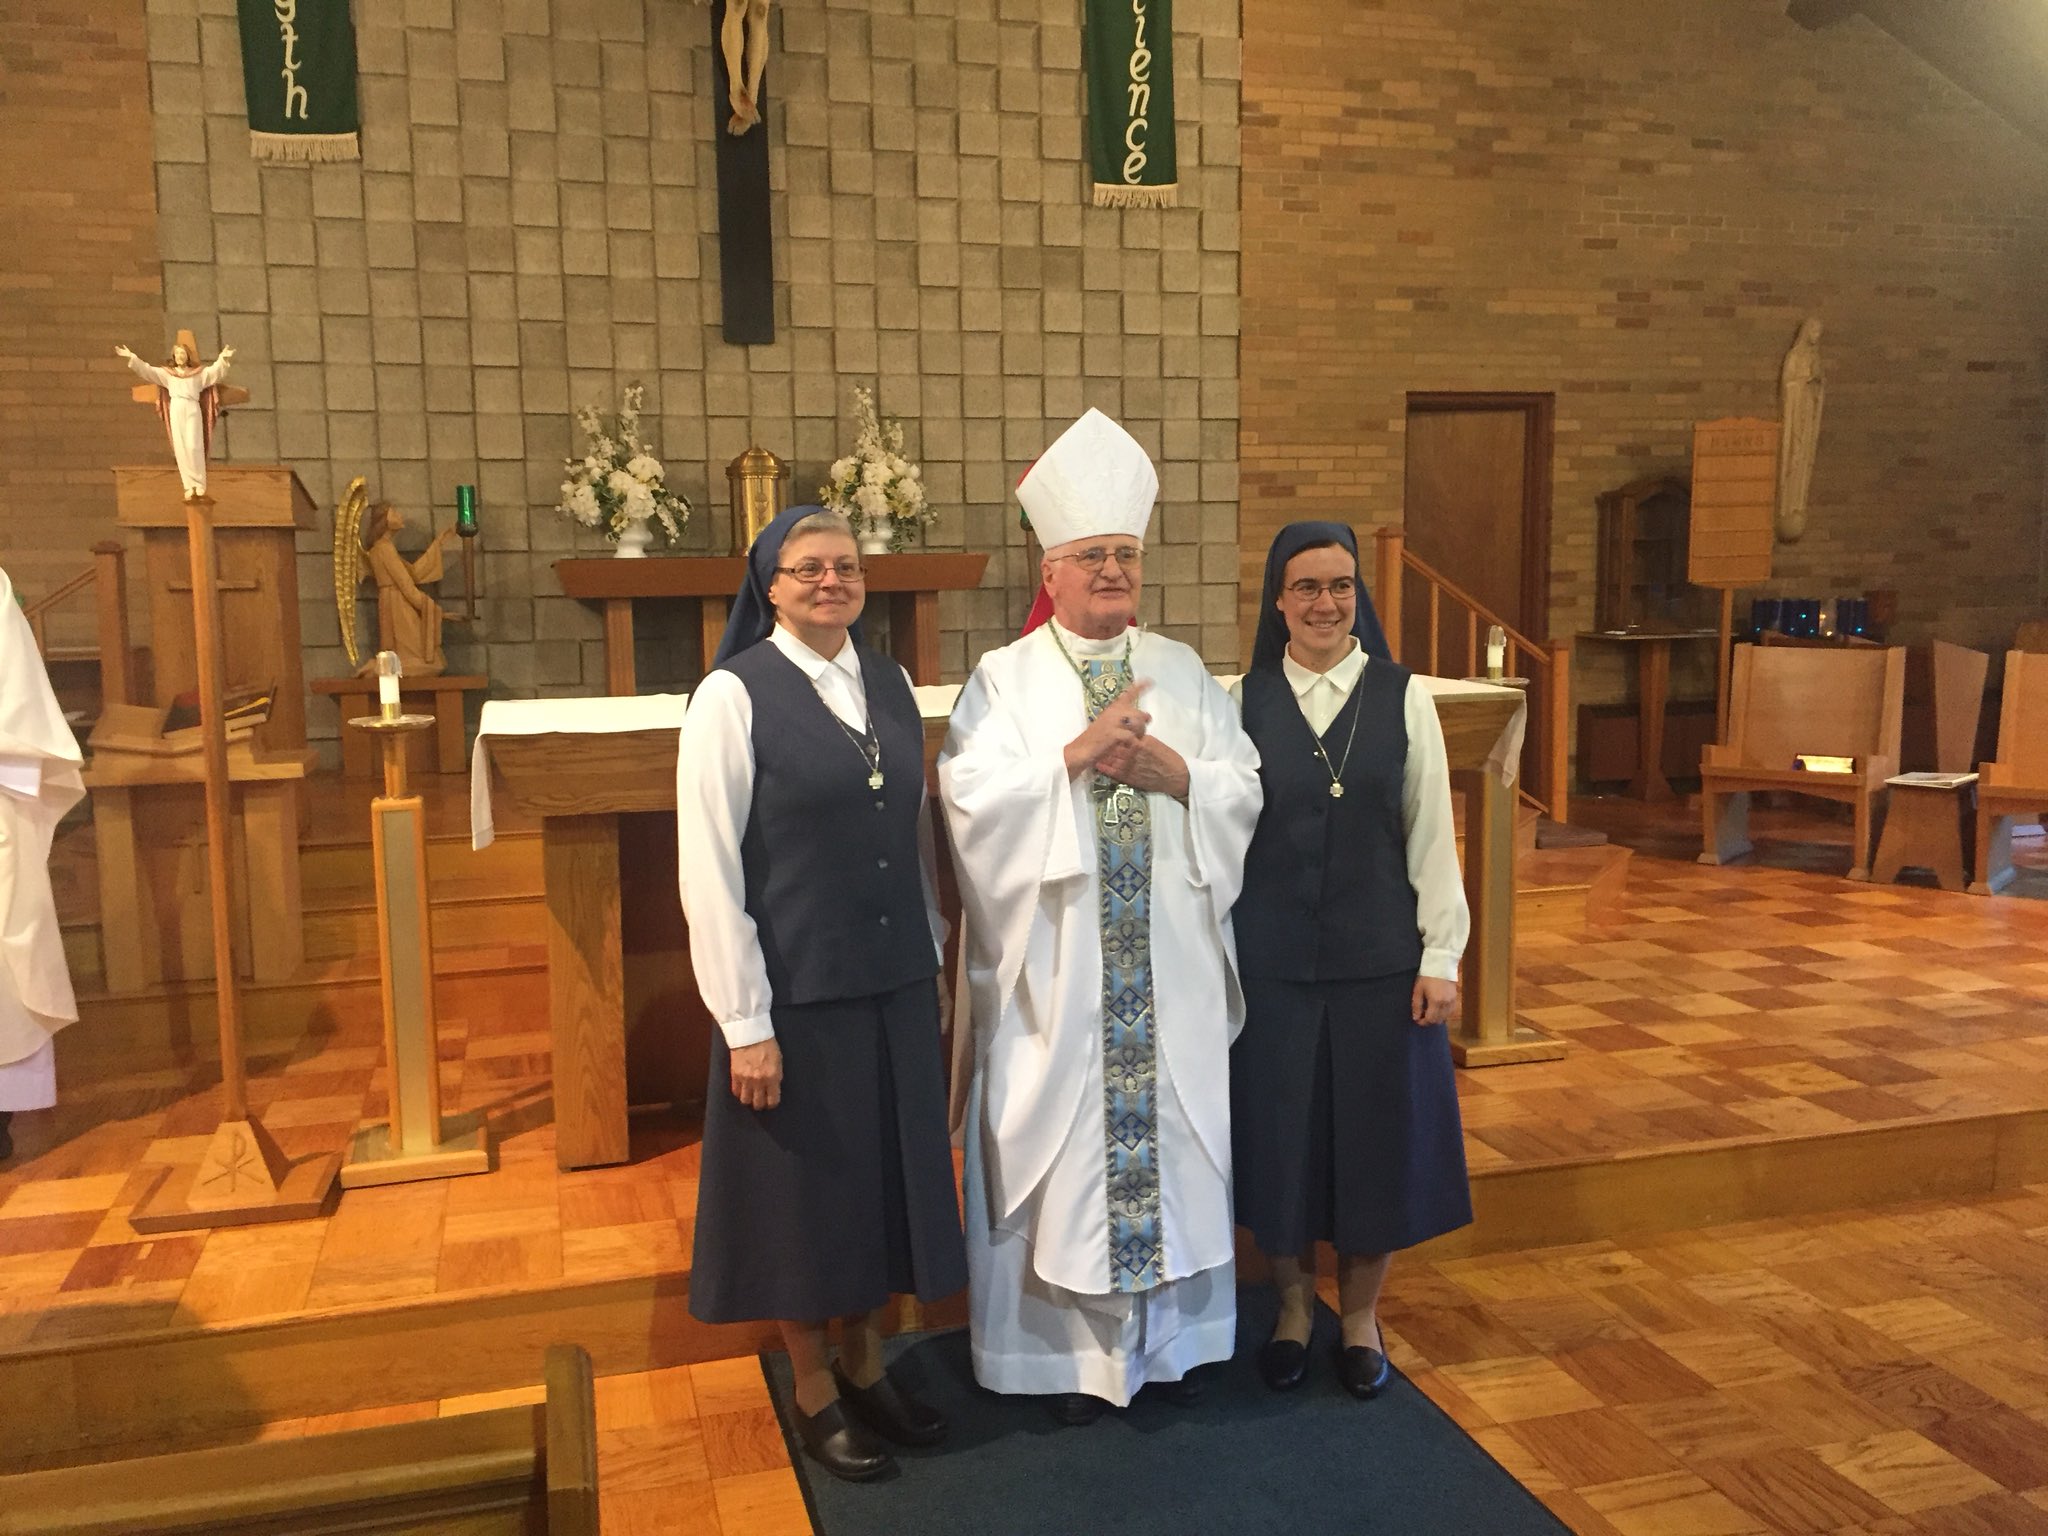 "It is the Lord!" - the Prayer of Our Newly Perpetually Professed Sister